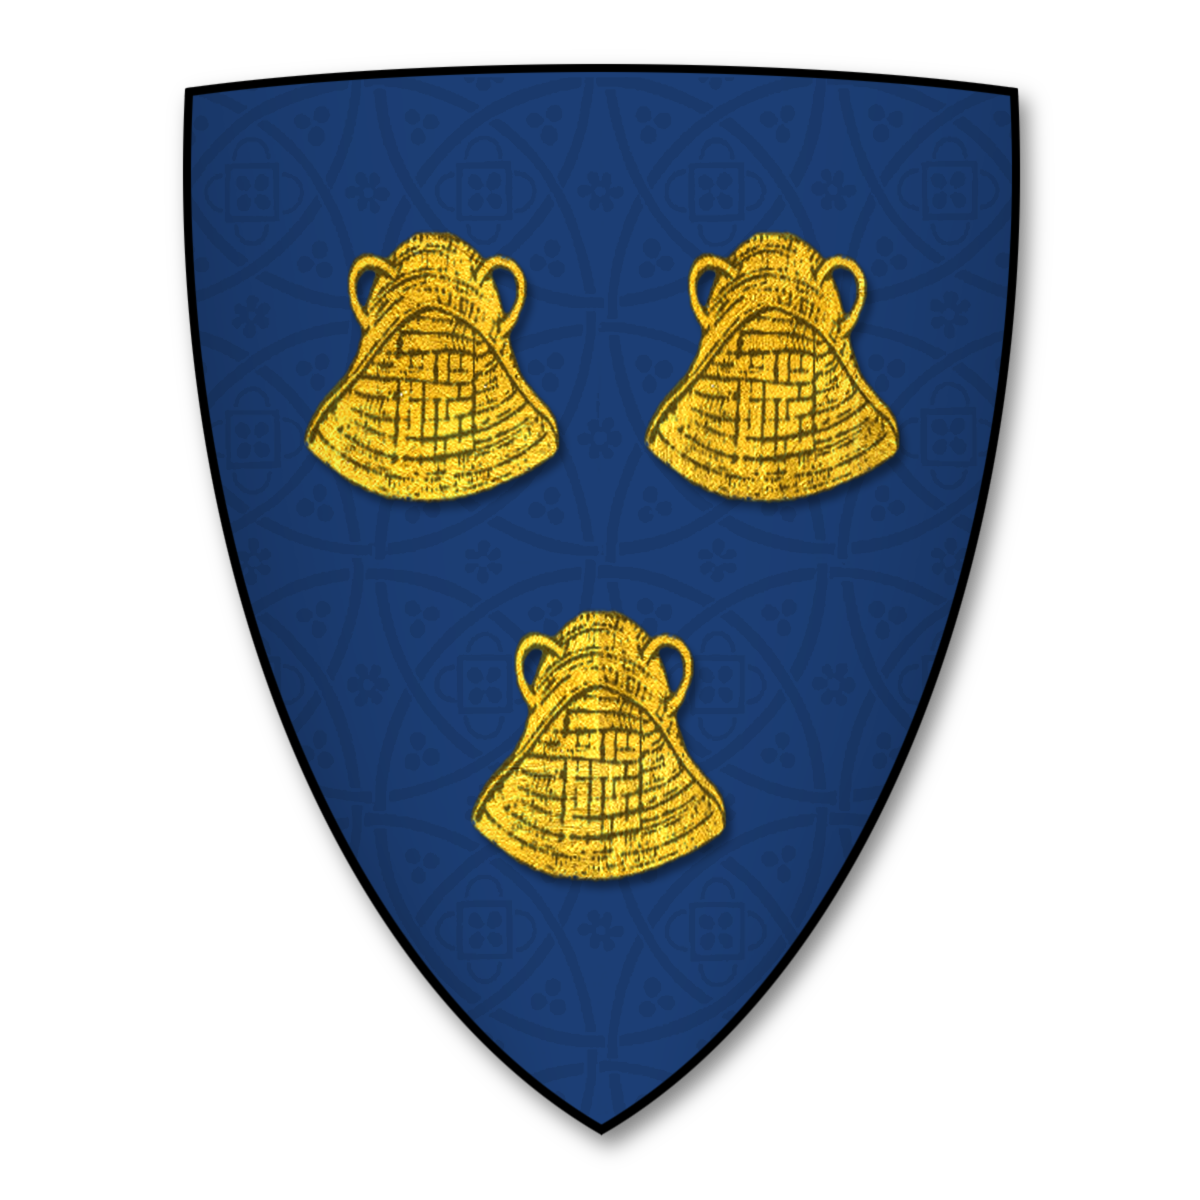 ASPILOGIA :: The Parliamentary Roll of Arms